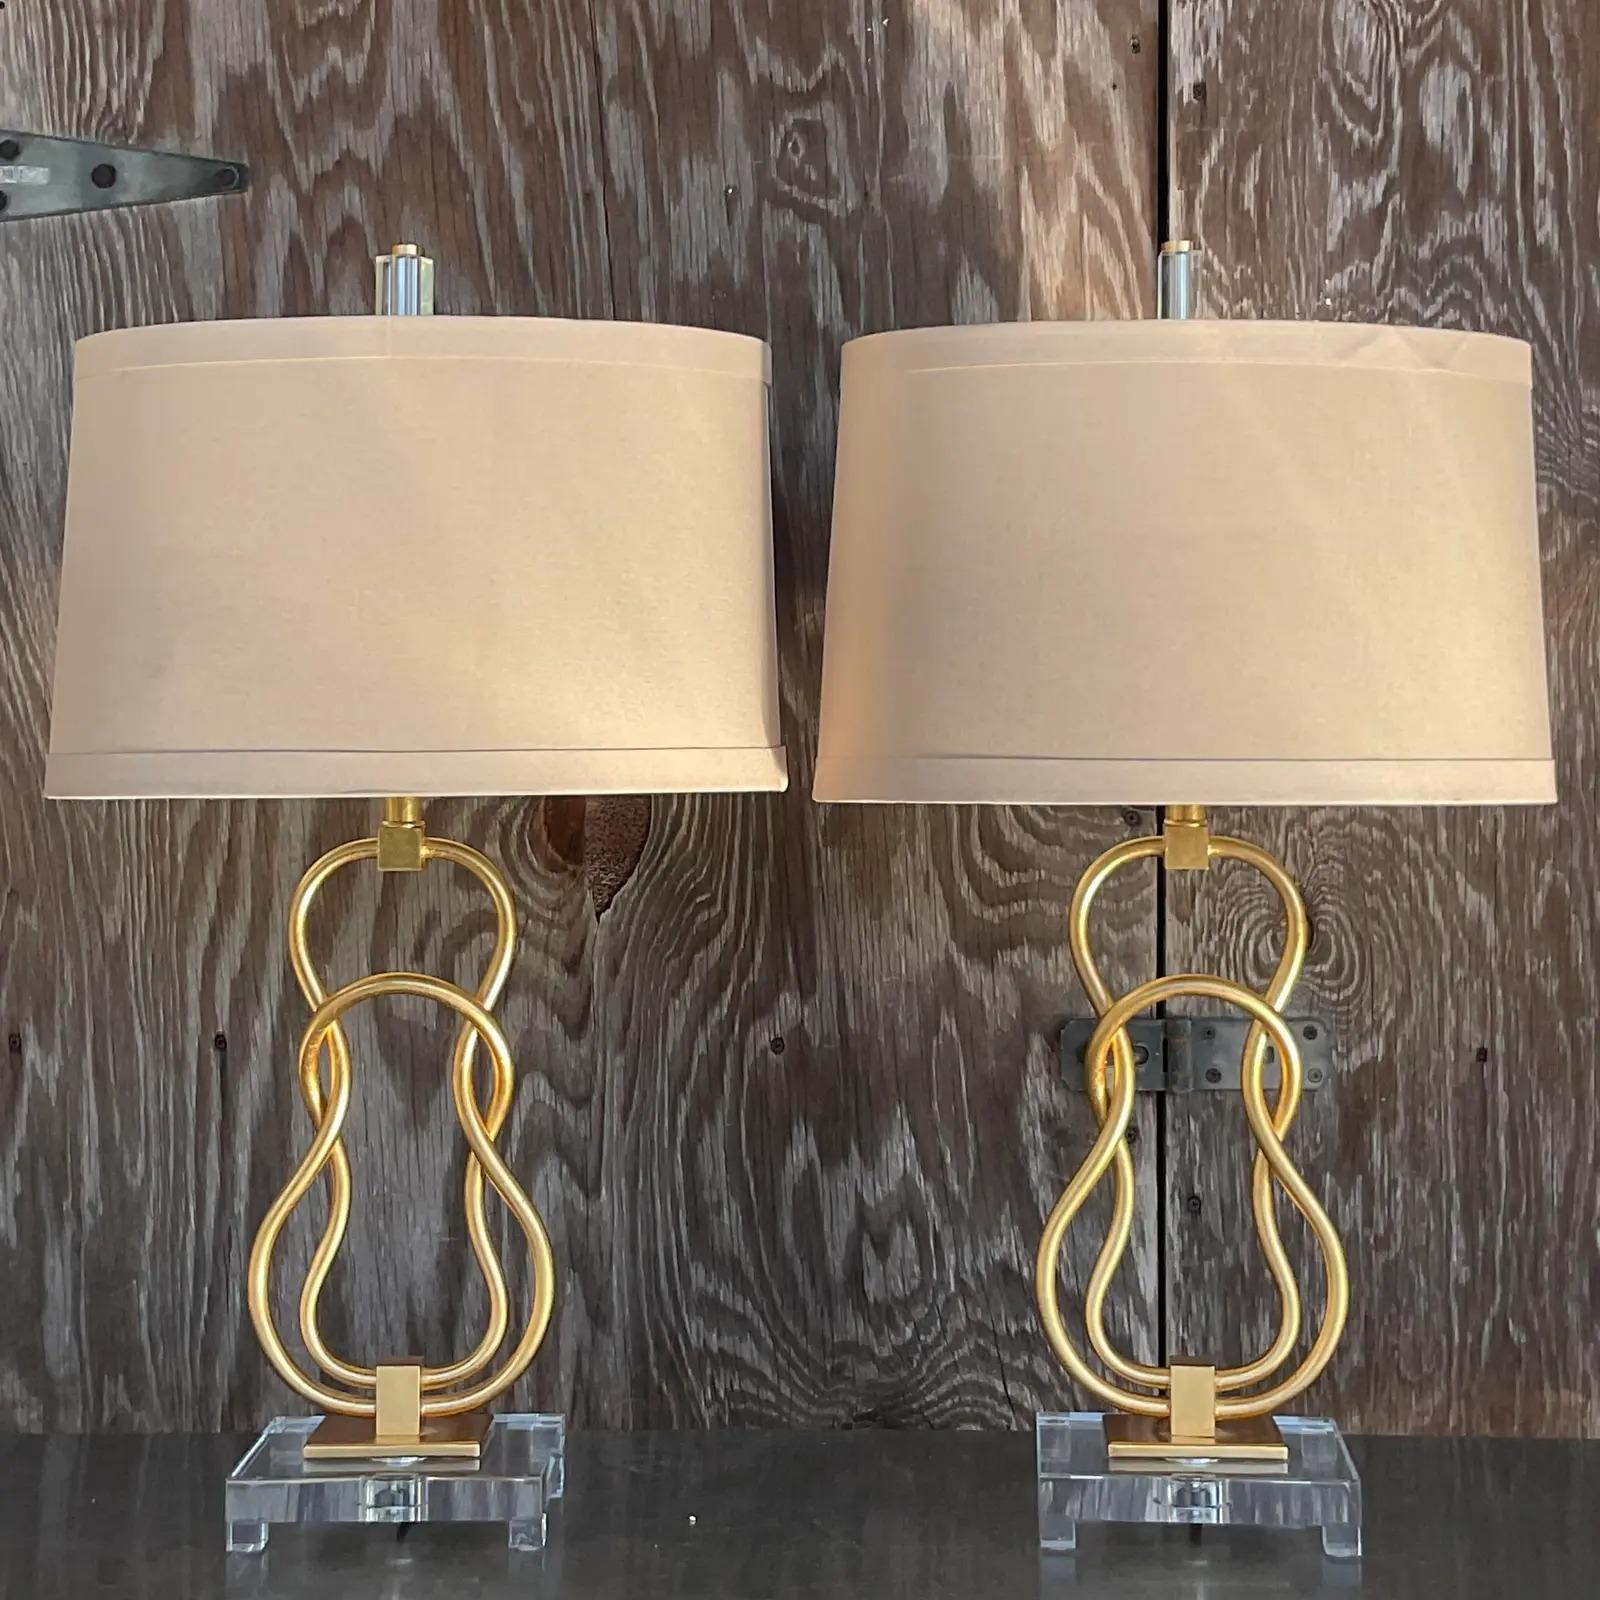 Vintage Contemporary Linked Gilt Rings Lamps - a Pair In Good Condition For Sale In west palm beach, FL